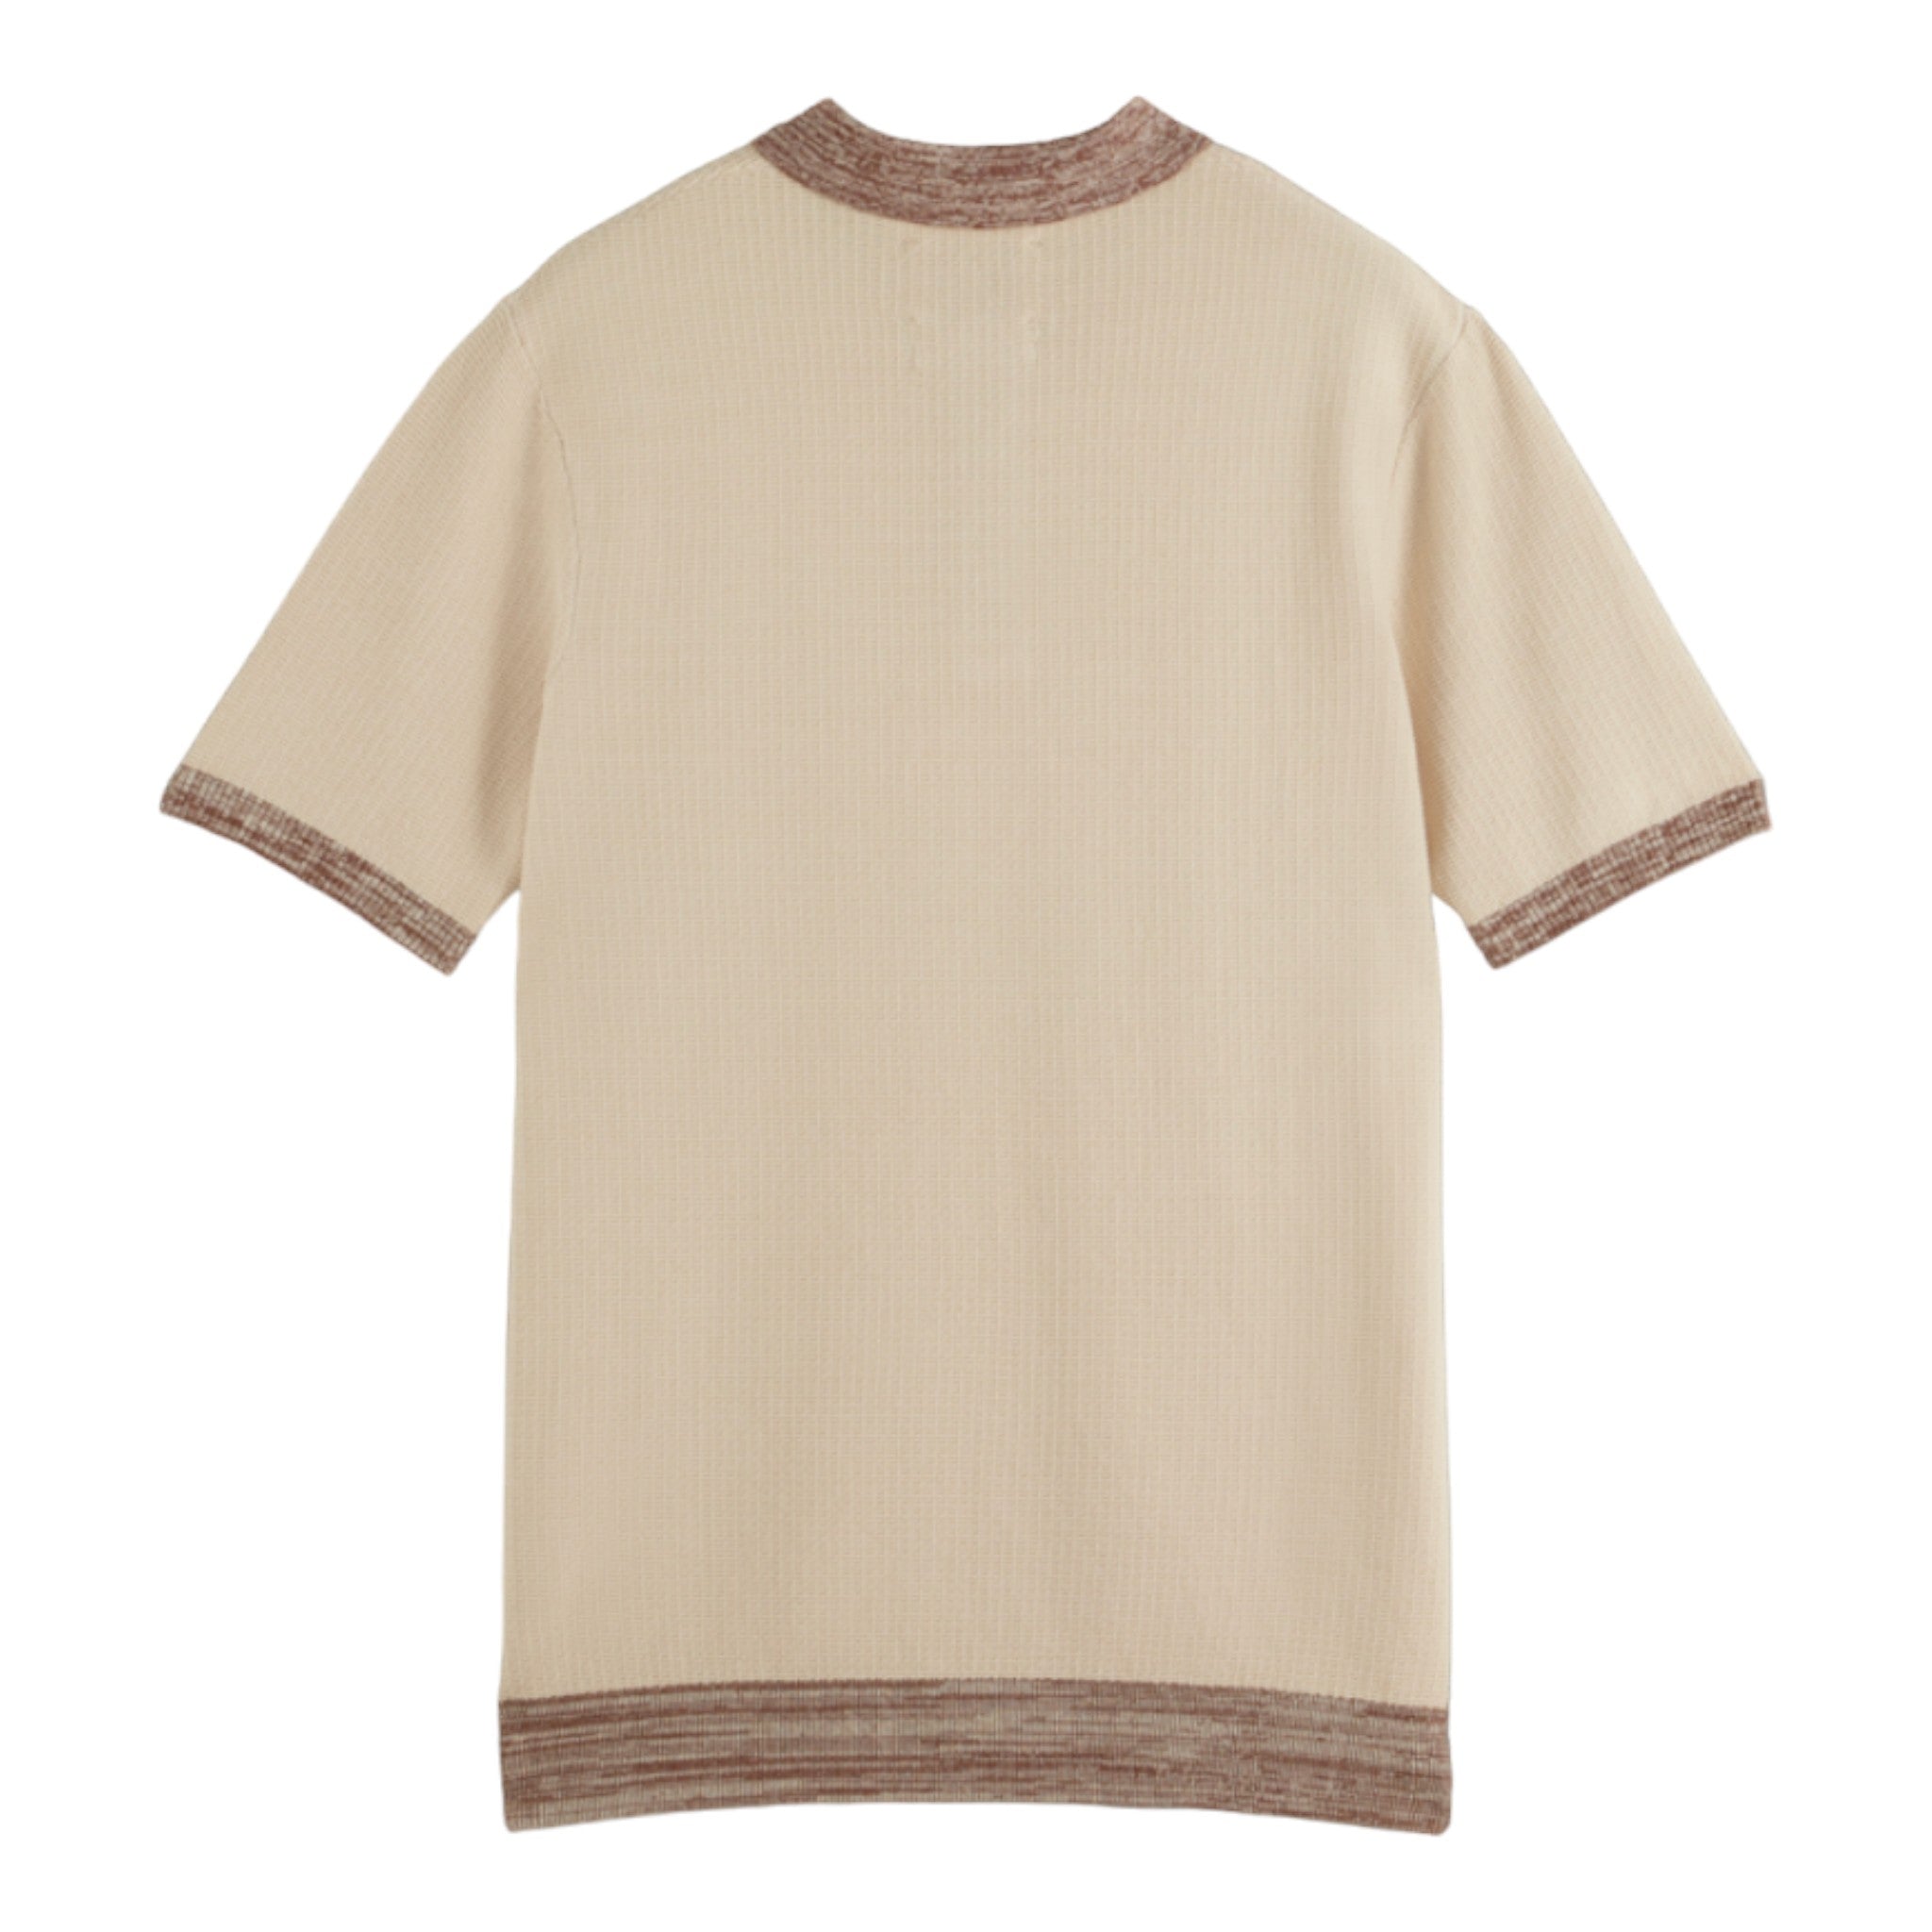 Tan knitted polo